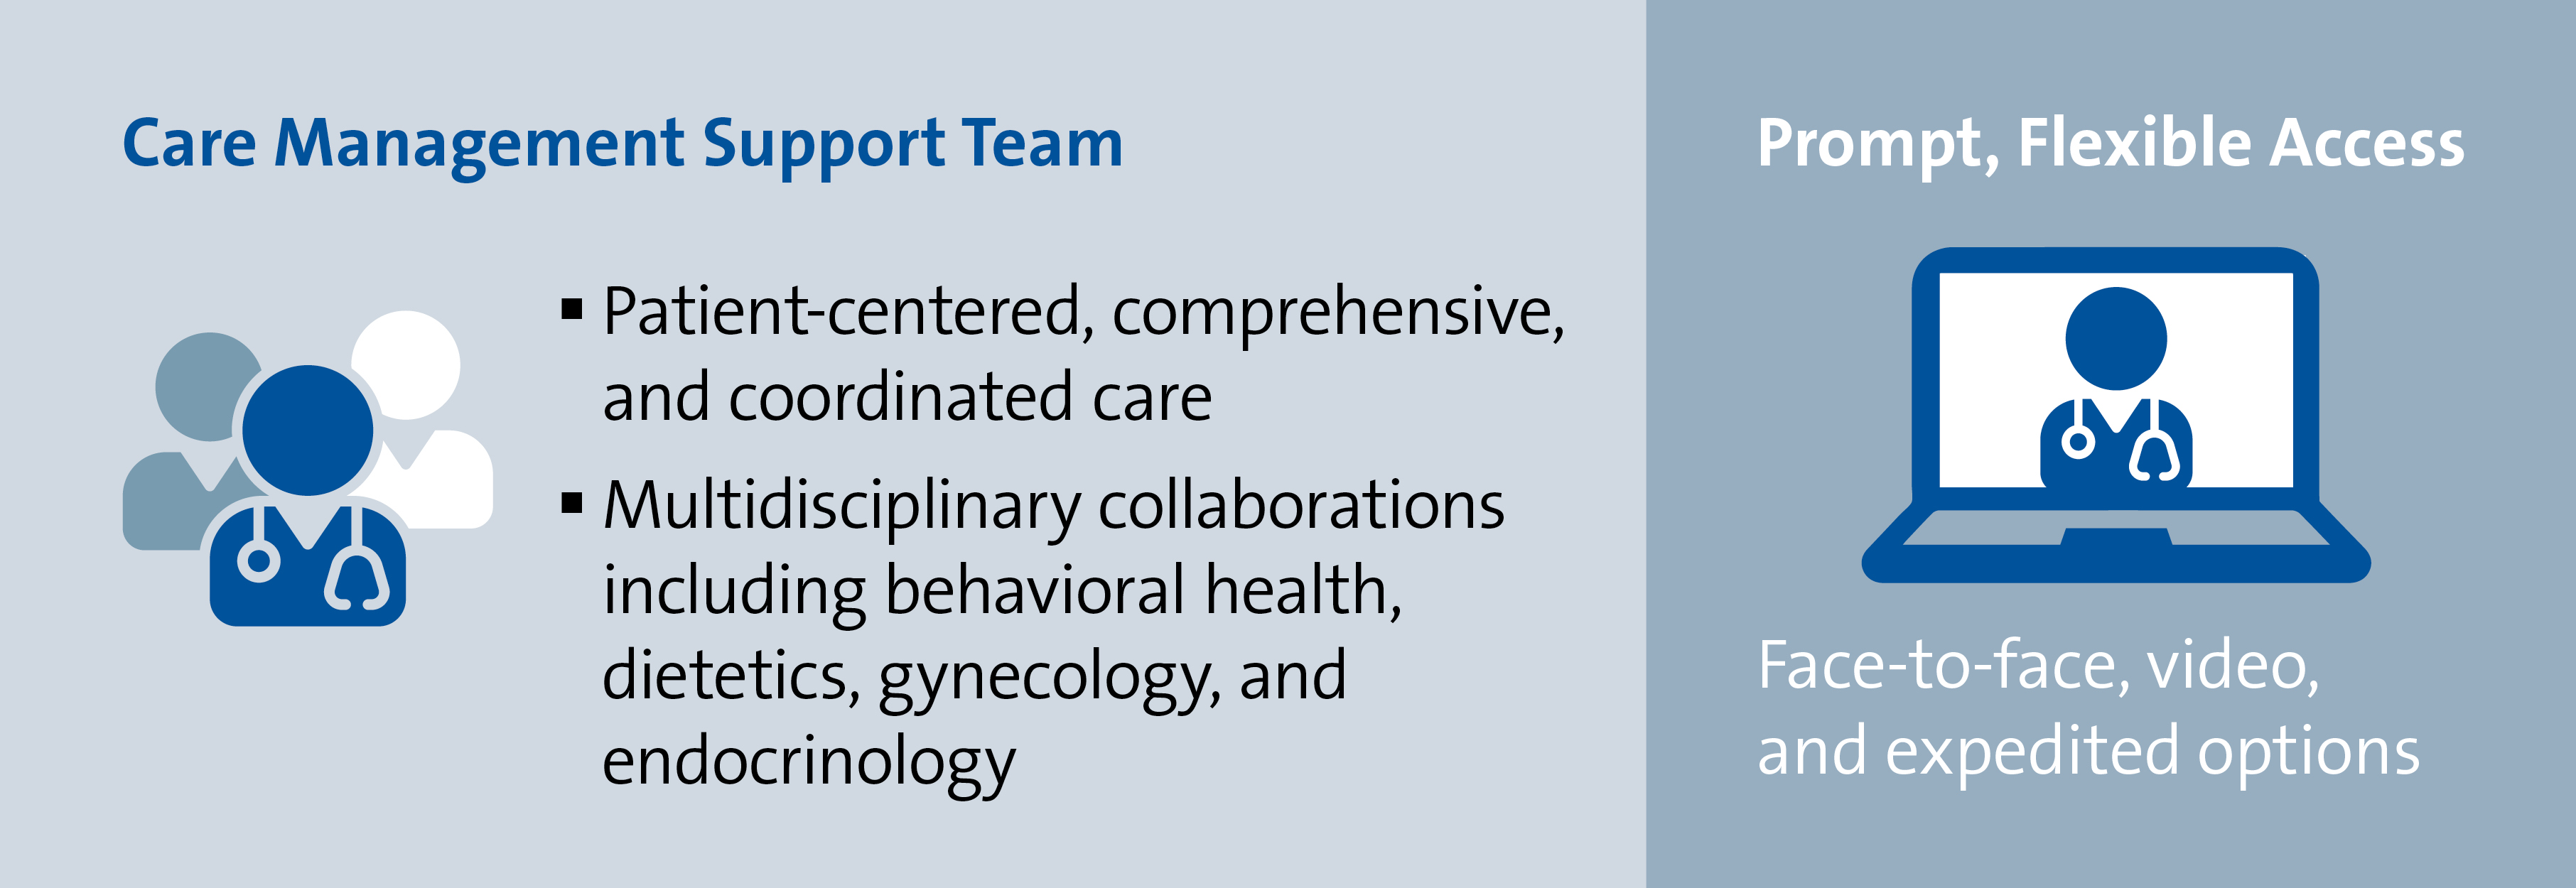 Care management support team graphic